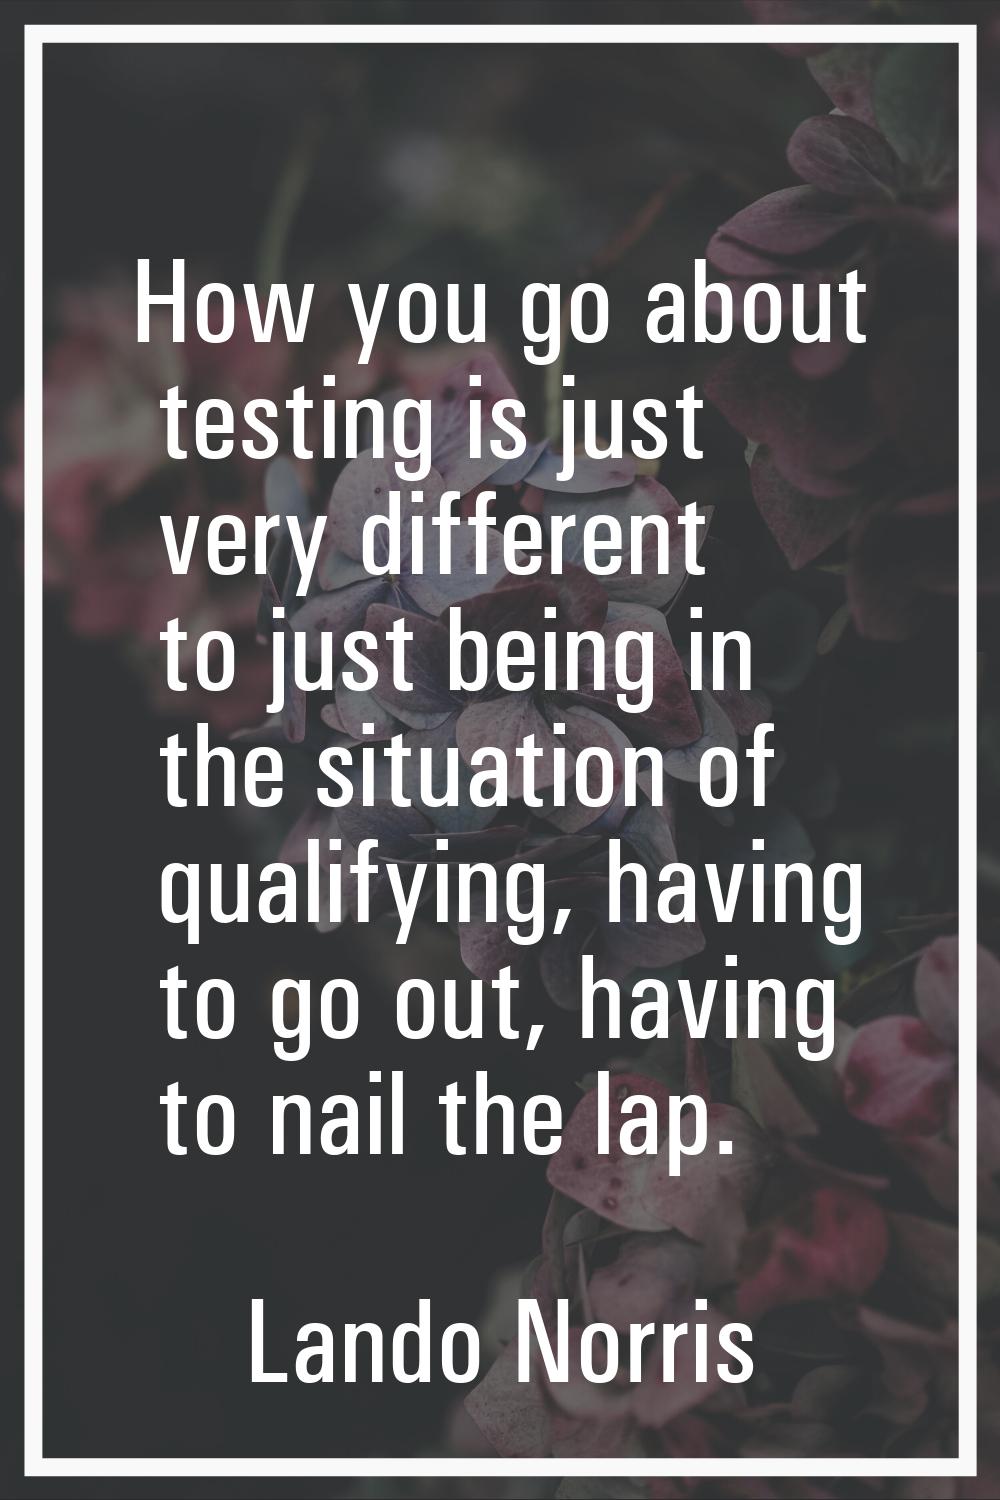 How you go about testing is just very different to just being in the situation of qualifying, havin